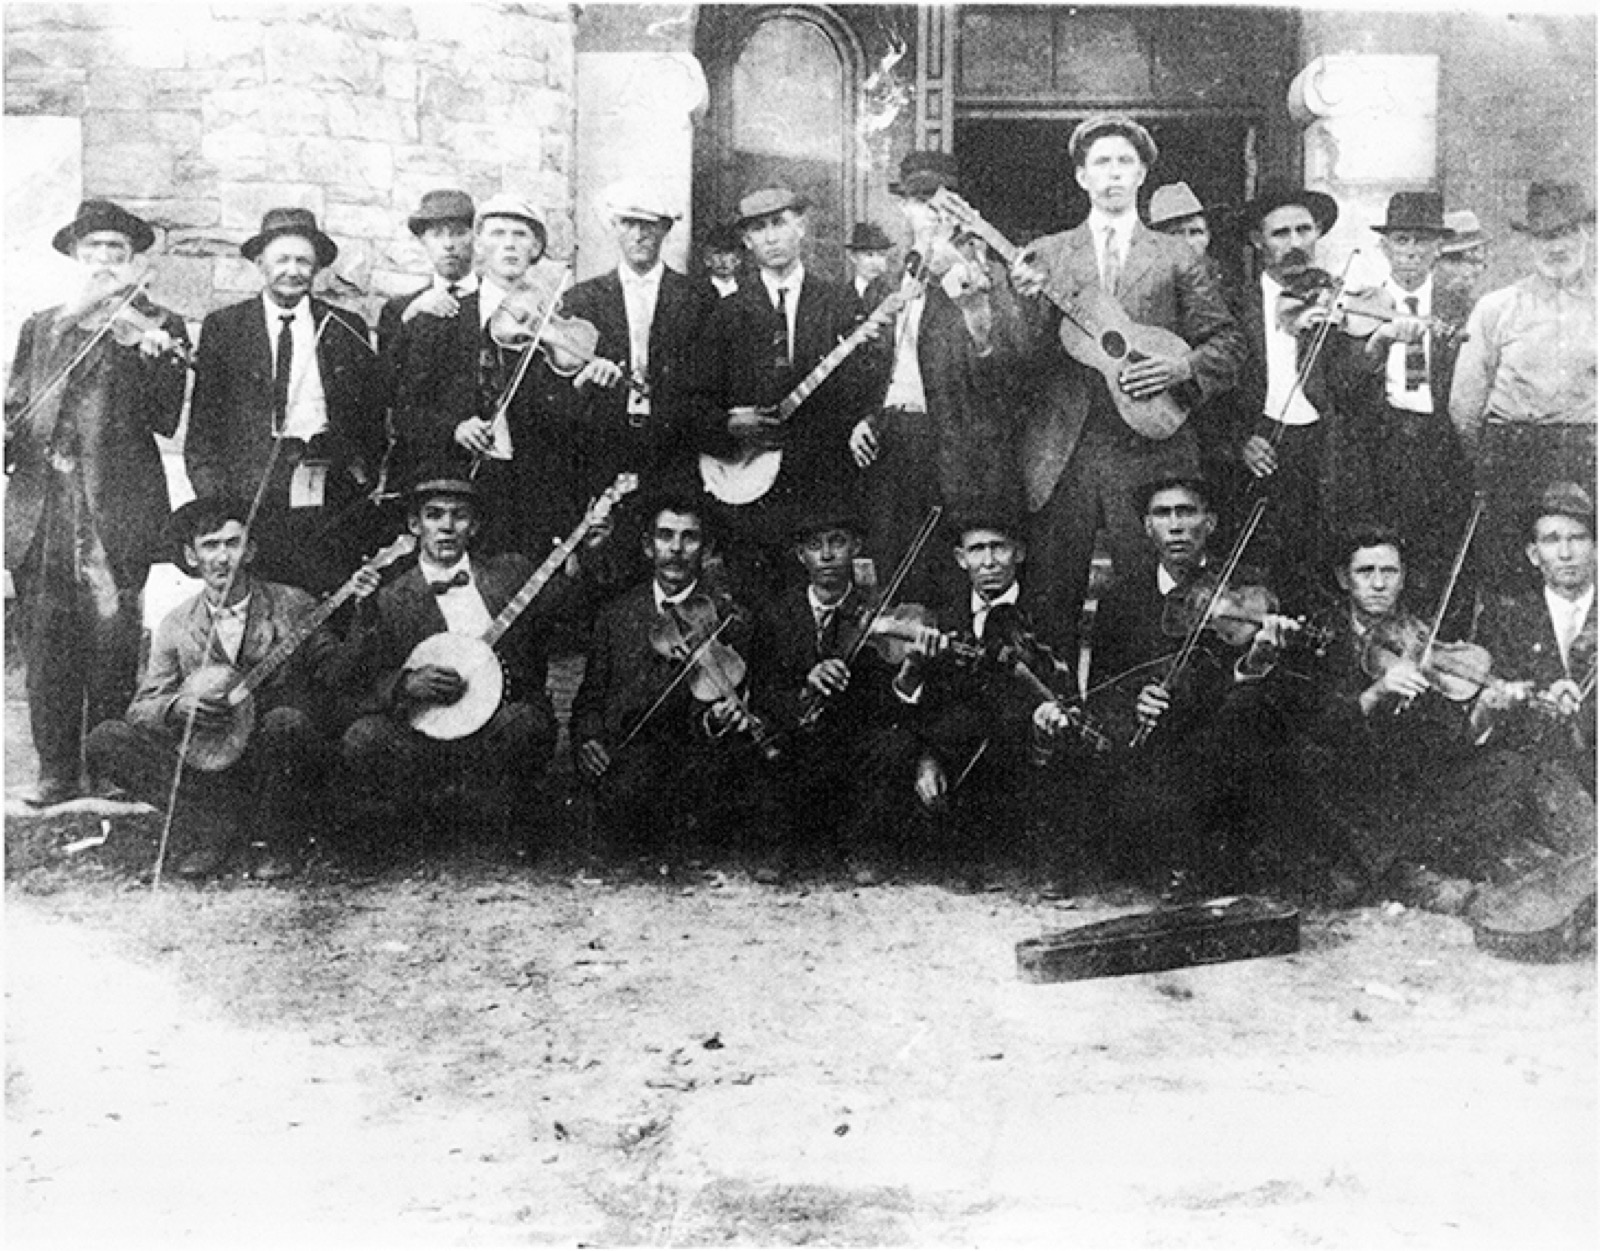 Musicians in Atlanta, ca. 1915. Photographer unknown. Courtesy of Dust-to-Digital and Todd Gladson